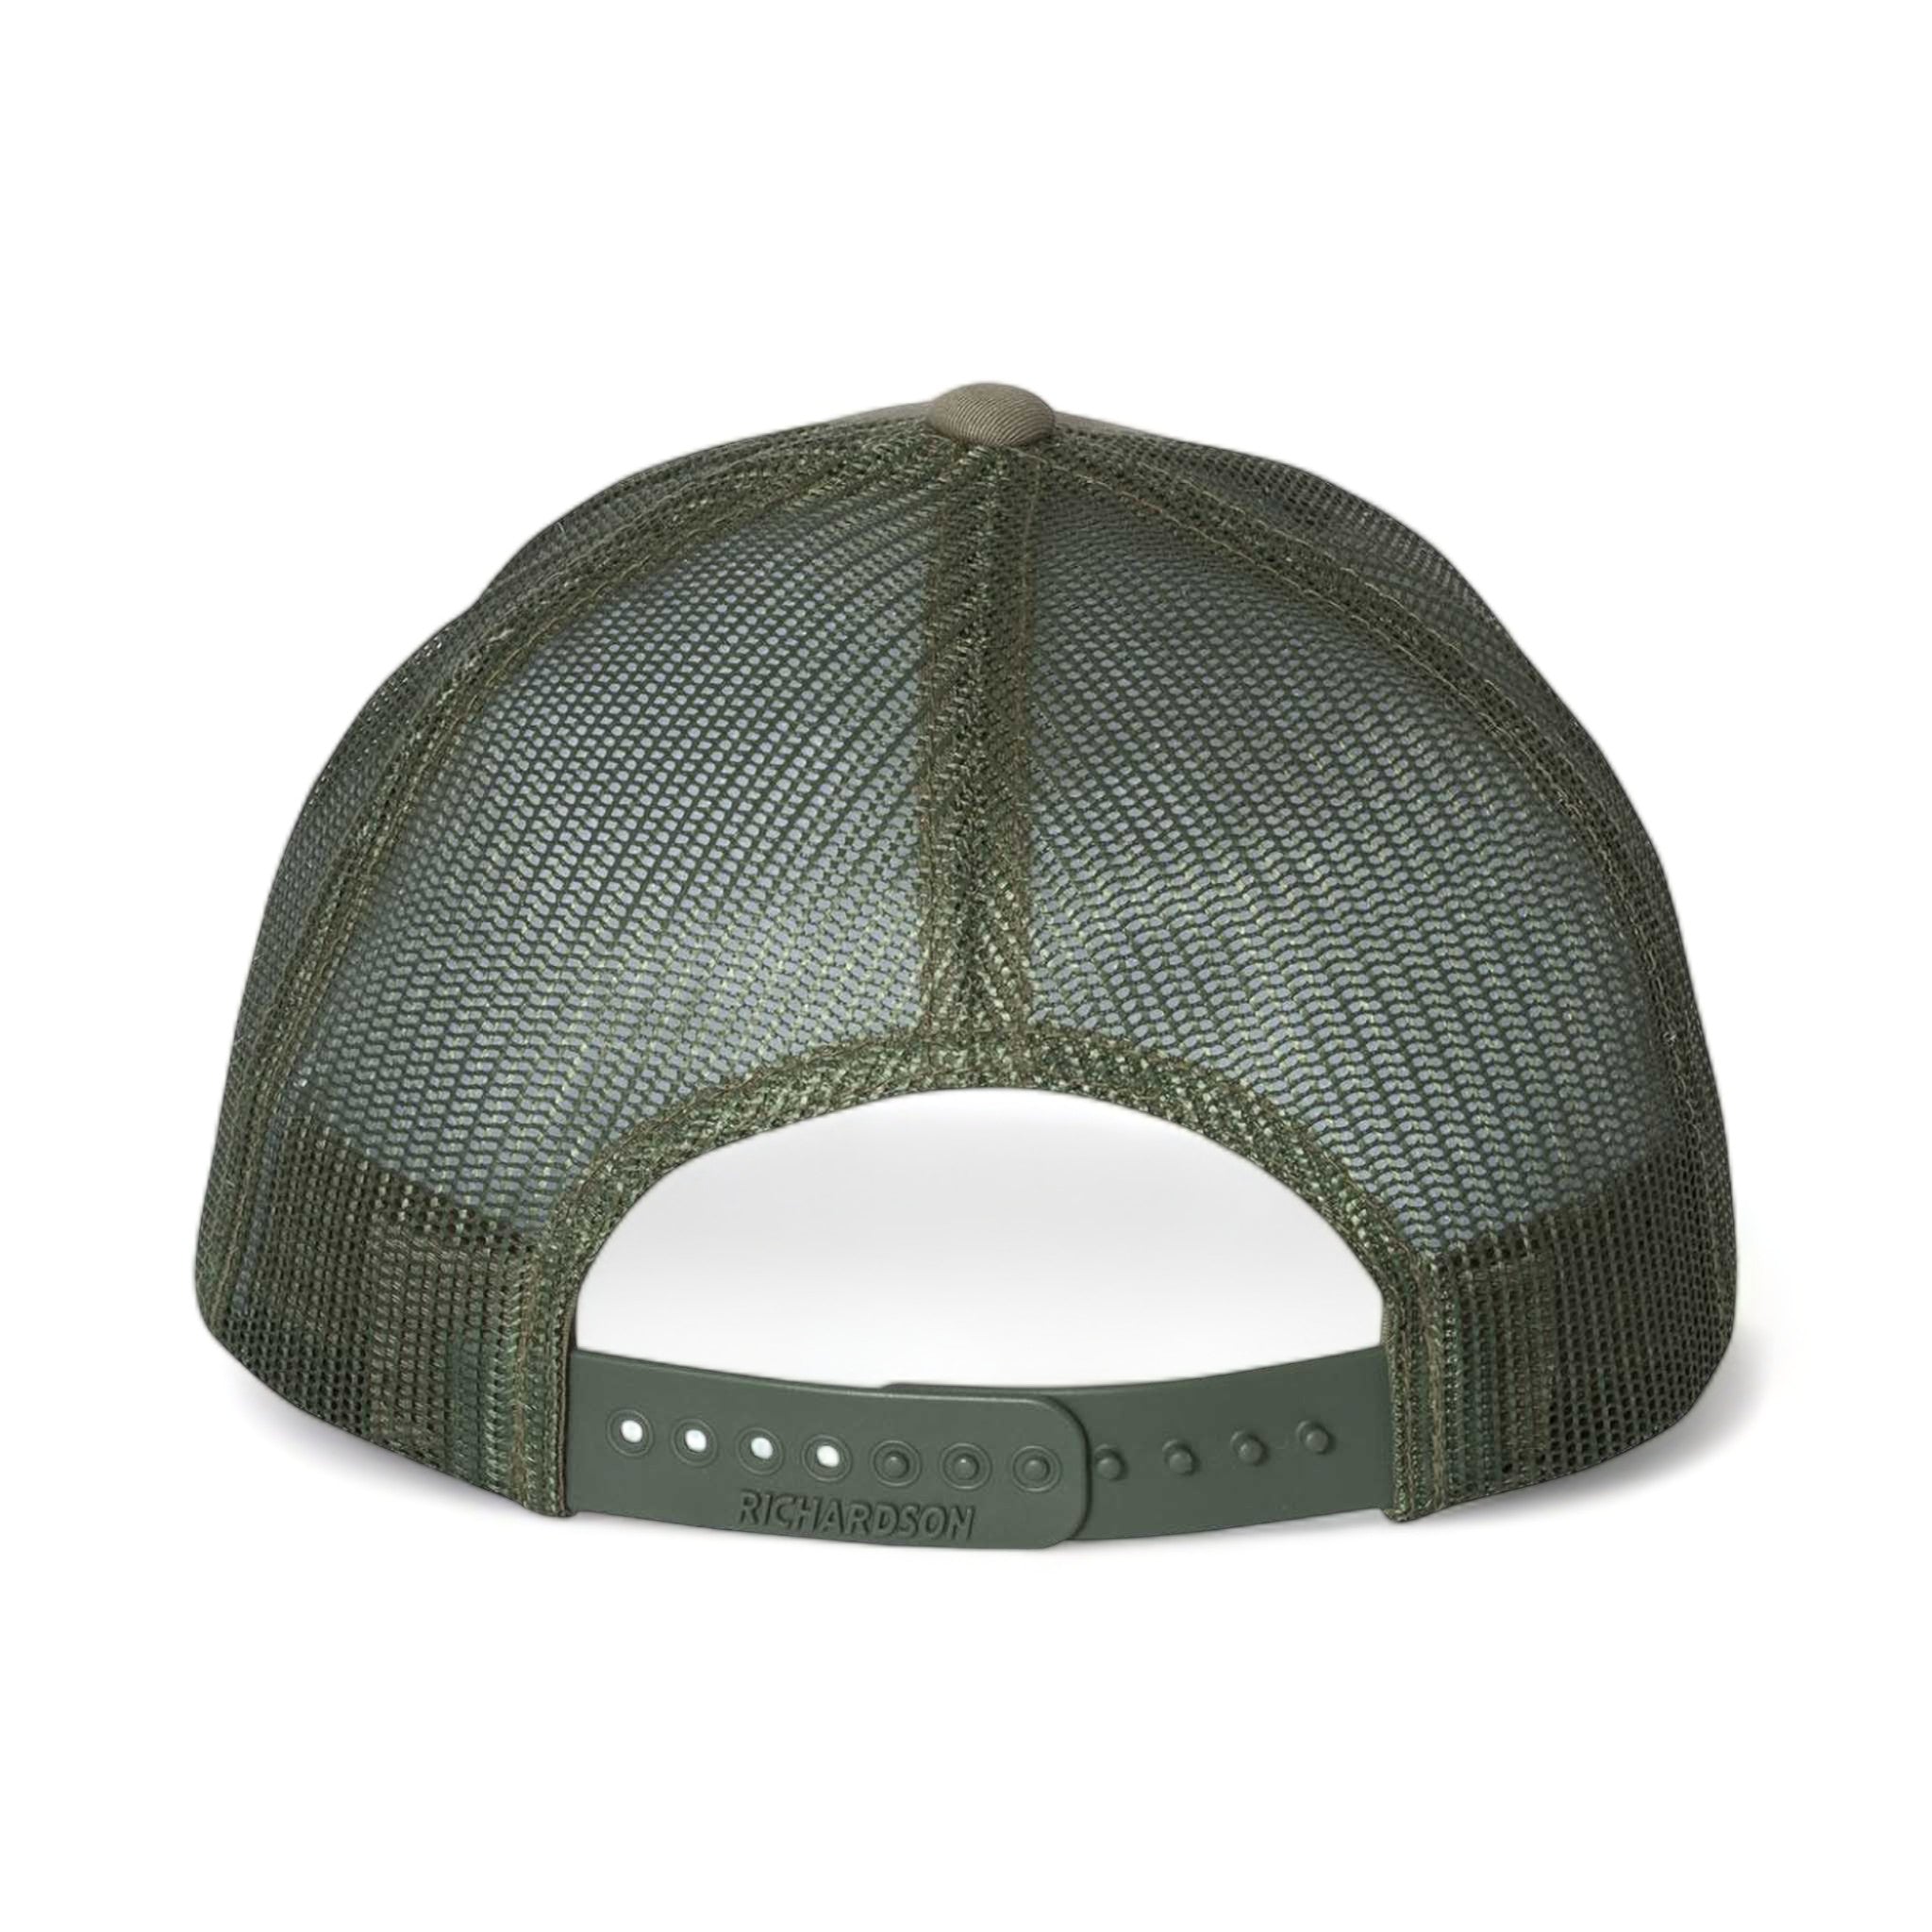 Back view of Richardson 115 custom hat in loden